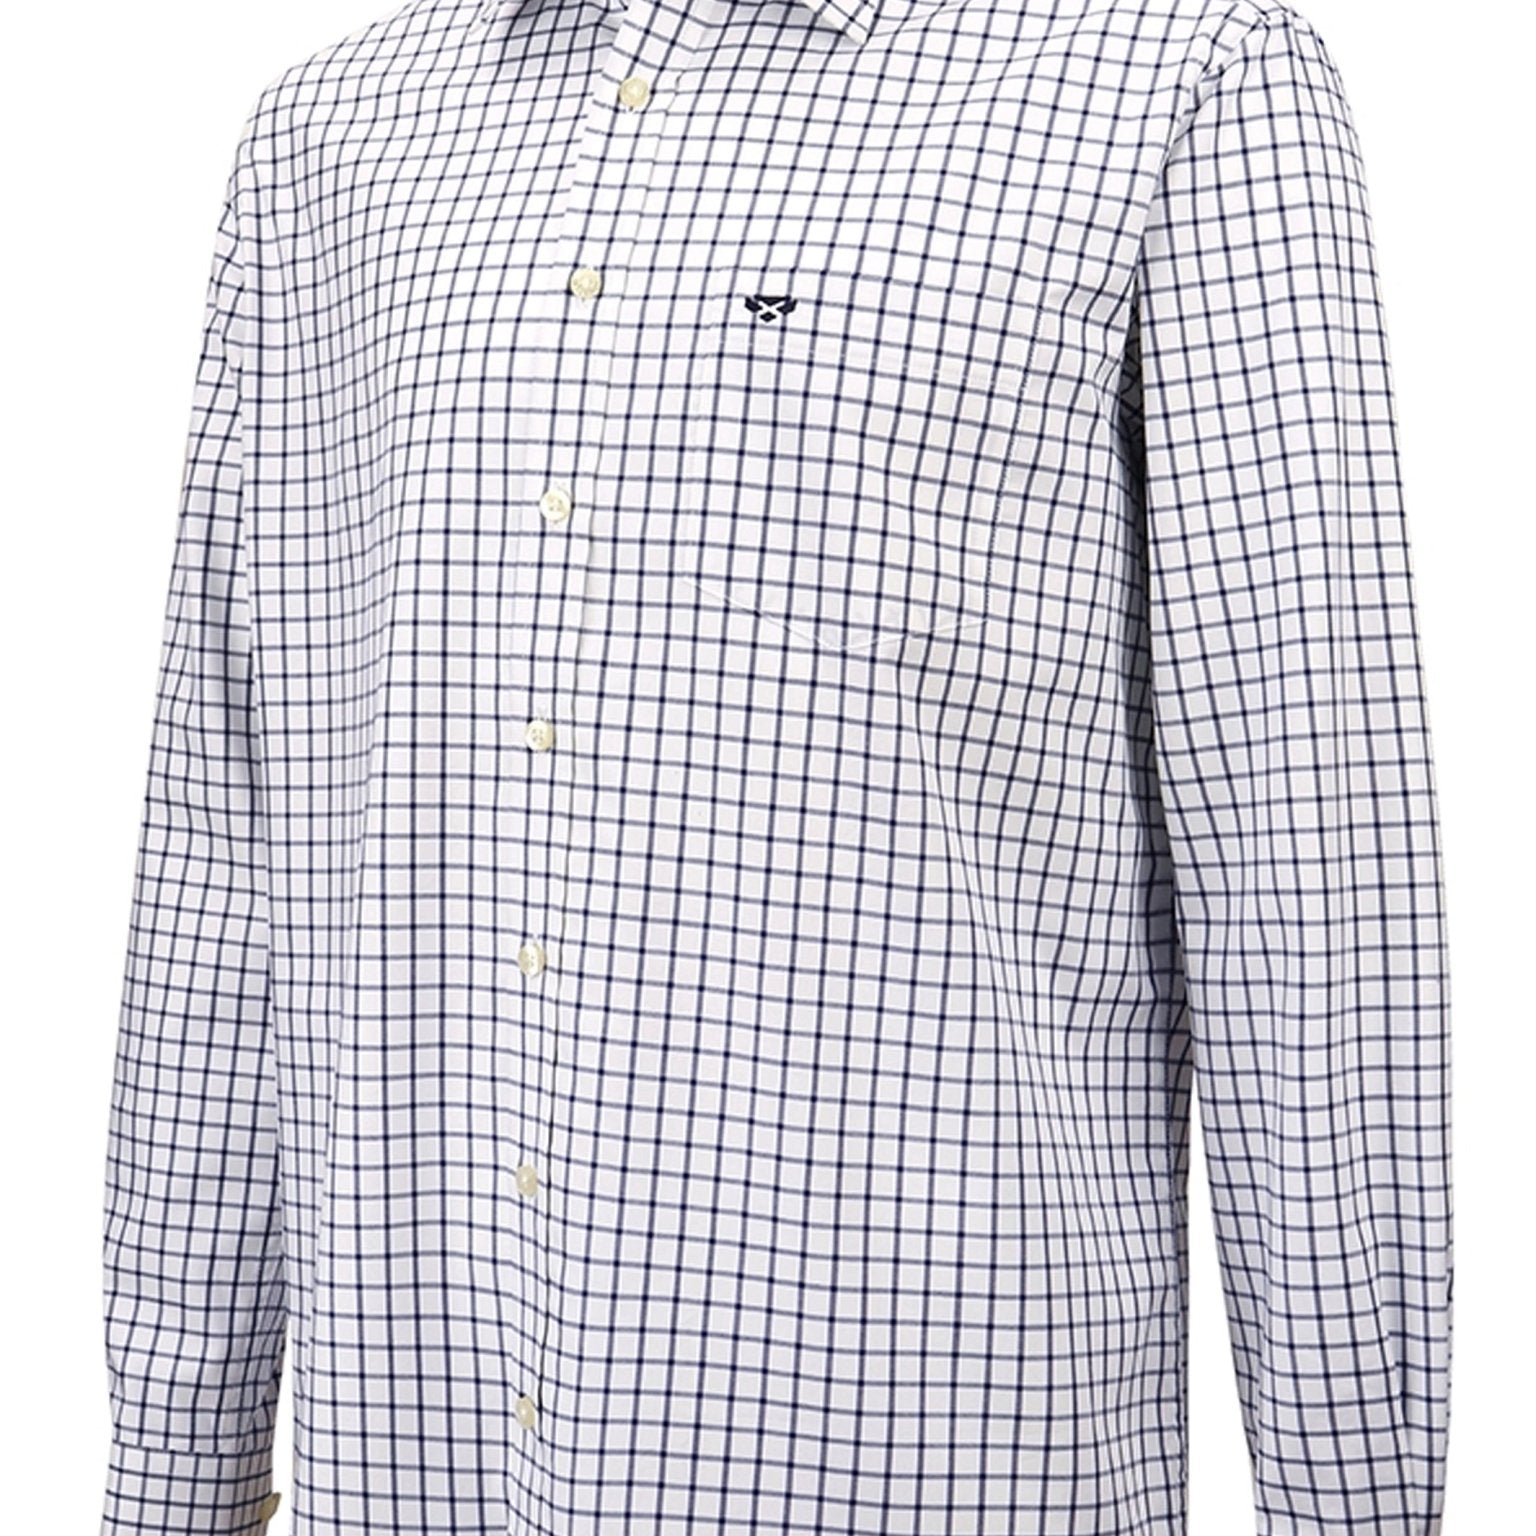 4elementsclothingHoggs of FifeHoggs of Fife - Turnberry Mens Shirt Twill CottonShirtTURN/WN/1